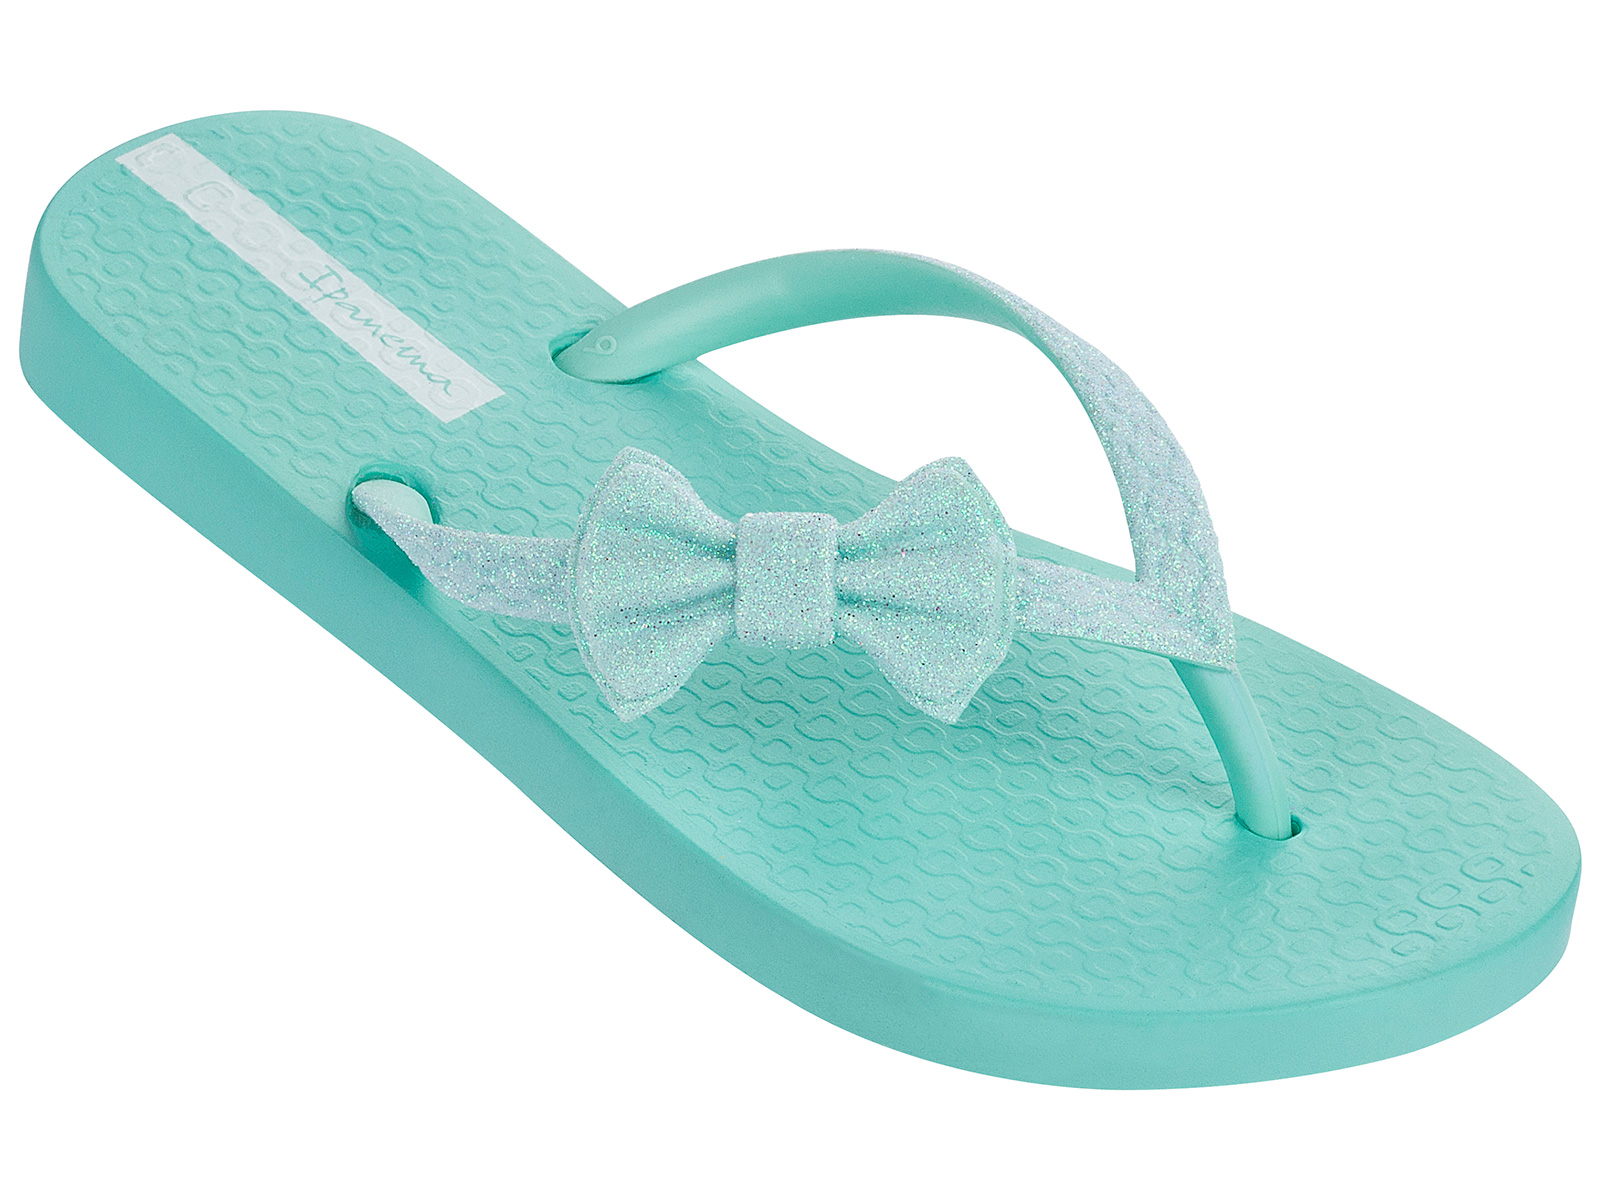 ipanema flip flops with bow